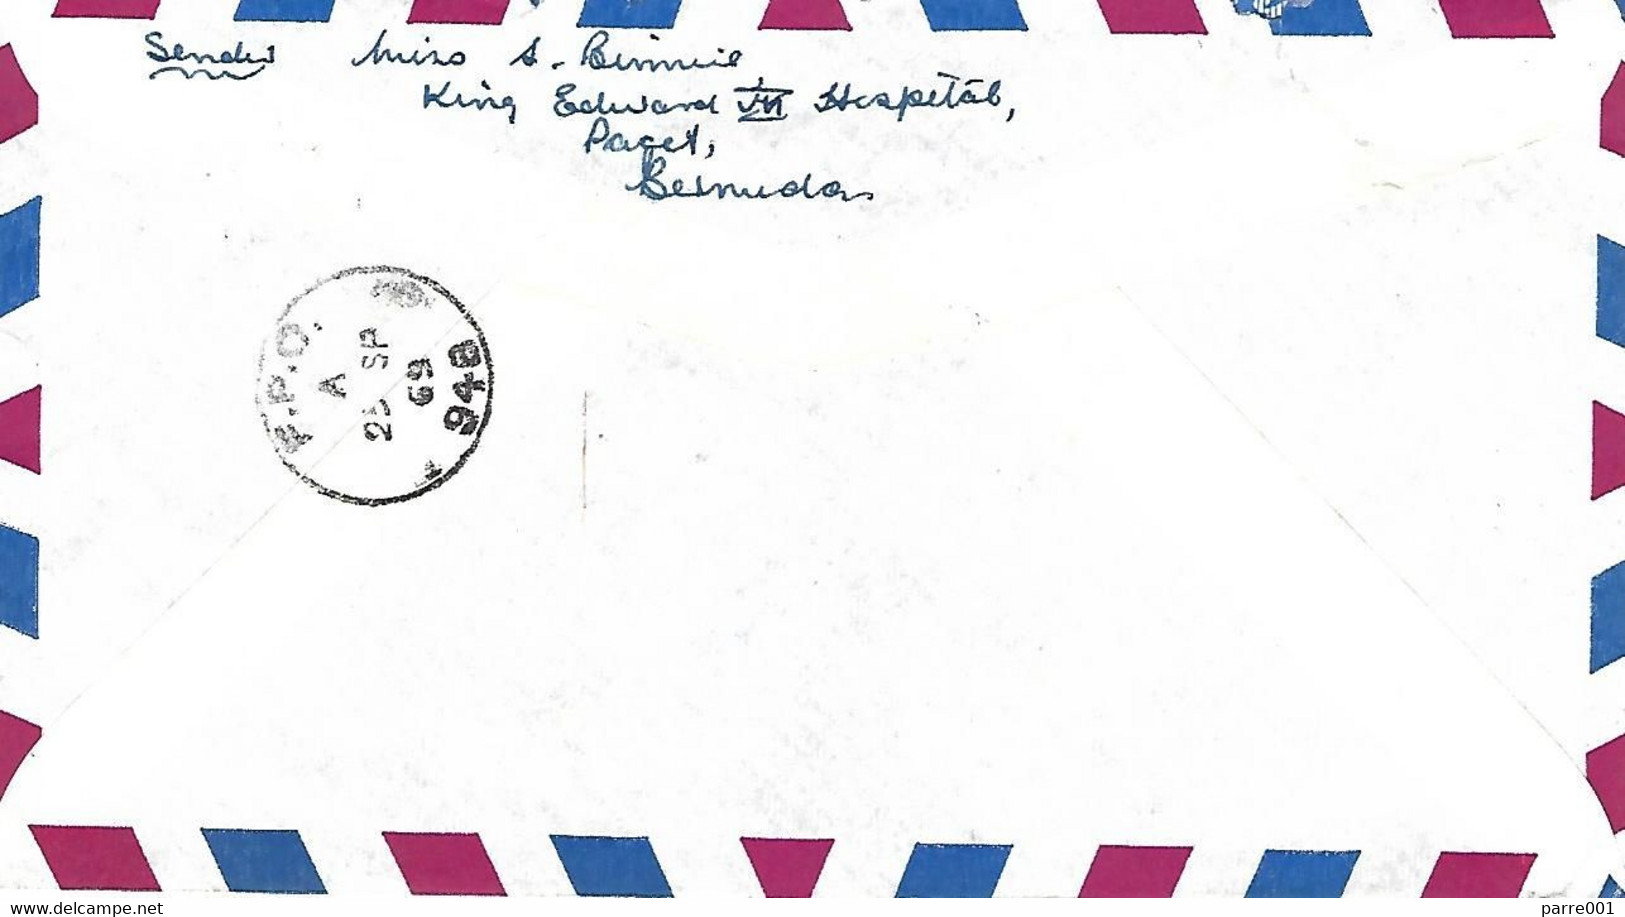 Bermuda 1974 FPO 948 BFPO1 Kowloon 40 Postal Courrier Communications Unit Royal Engineers Forces Official Cover - Cartas & Documentos